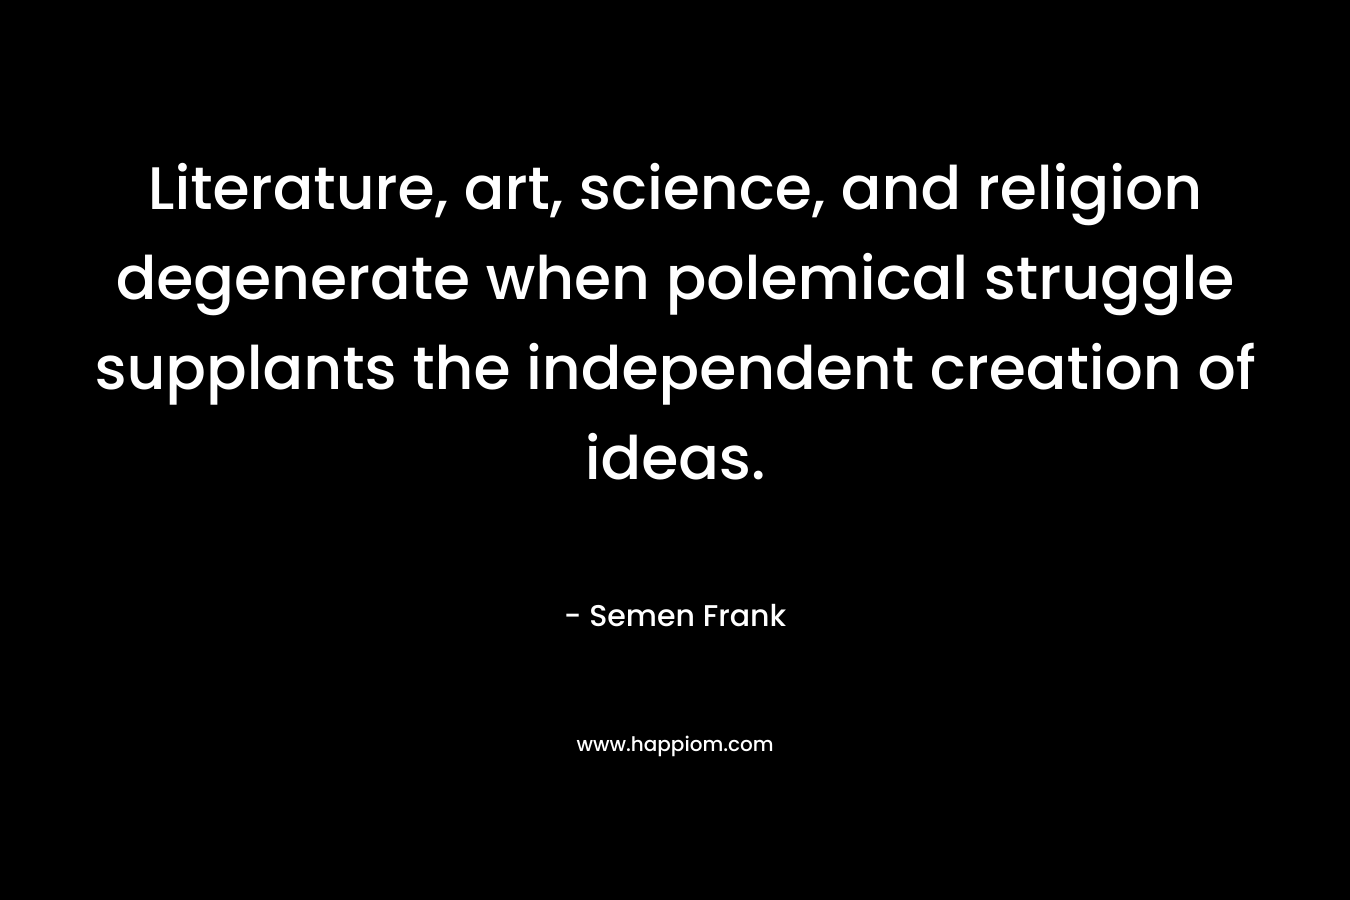 Literature, art, science, and religion degenerate when polemical struggle supplants the independent creation of ideas. – Semen Frank